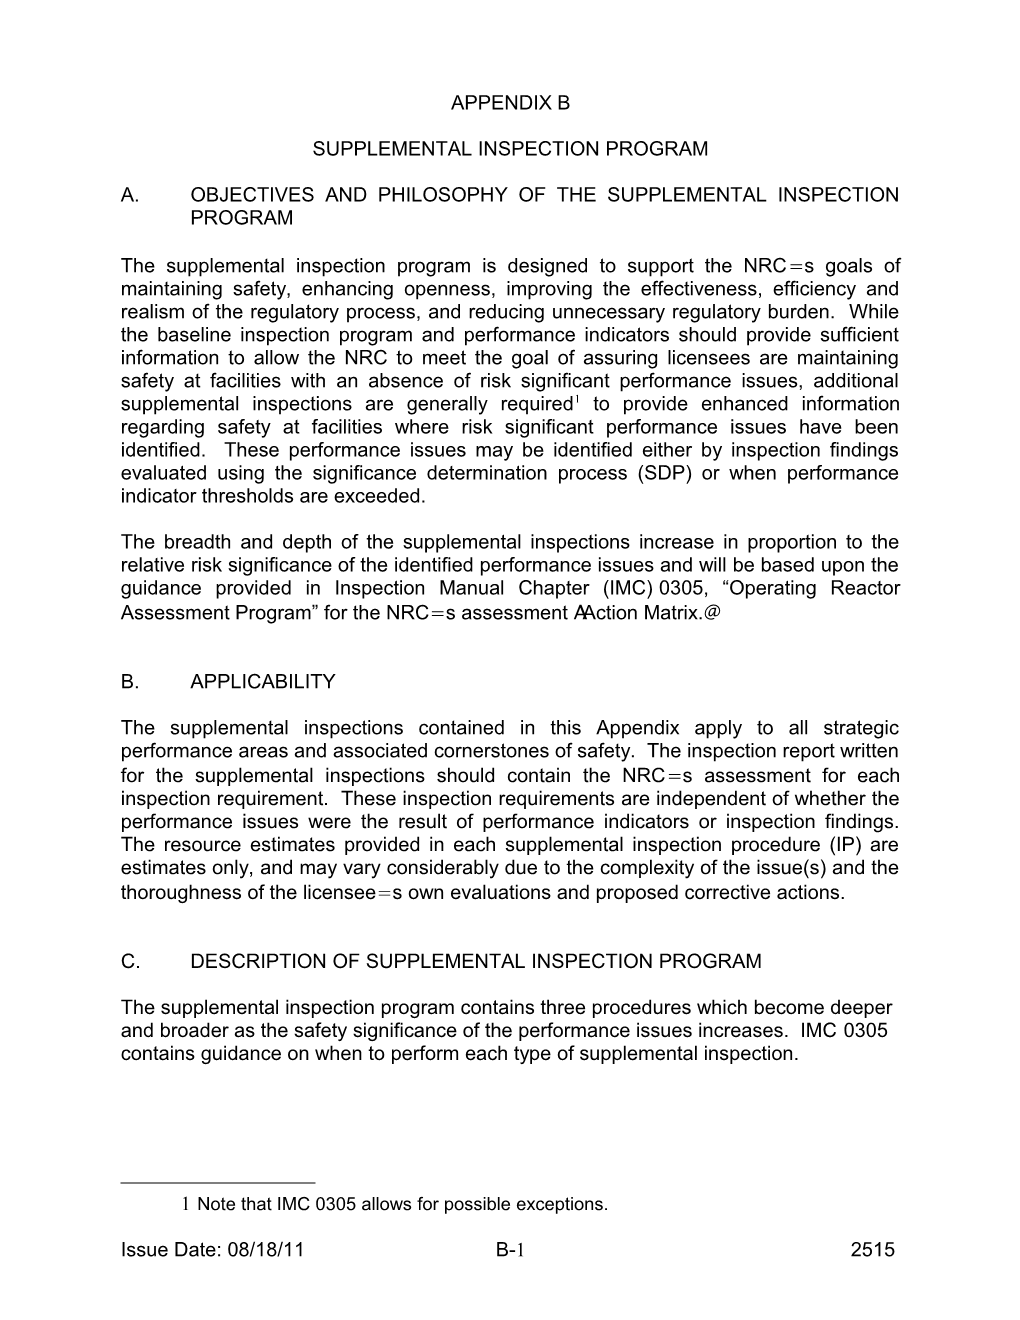 A.Objectives and Philosophy of the Supplemental Inspection Program